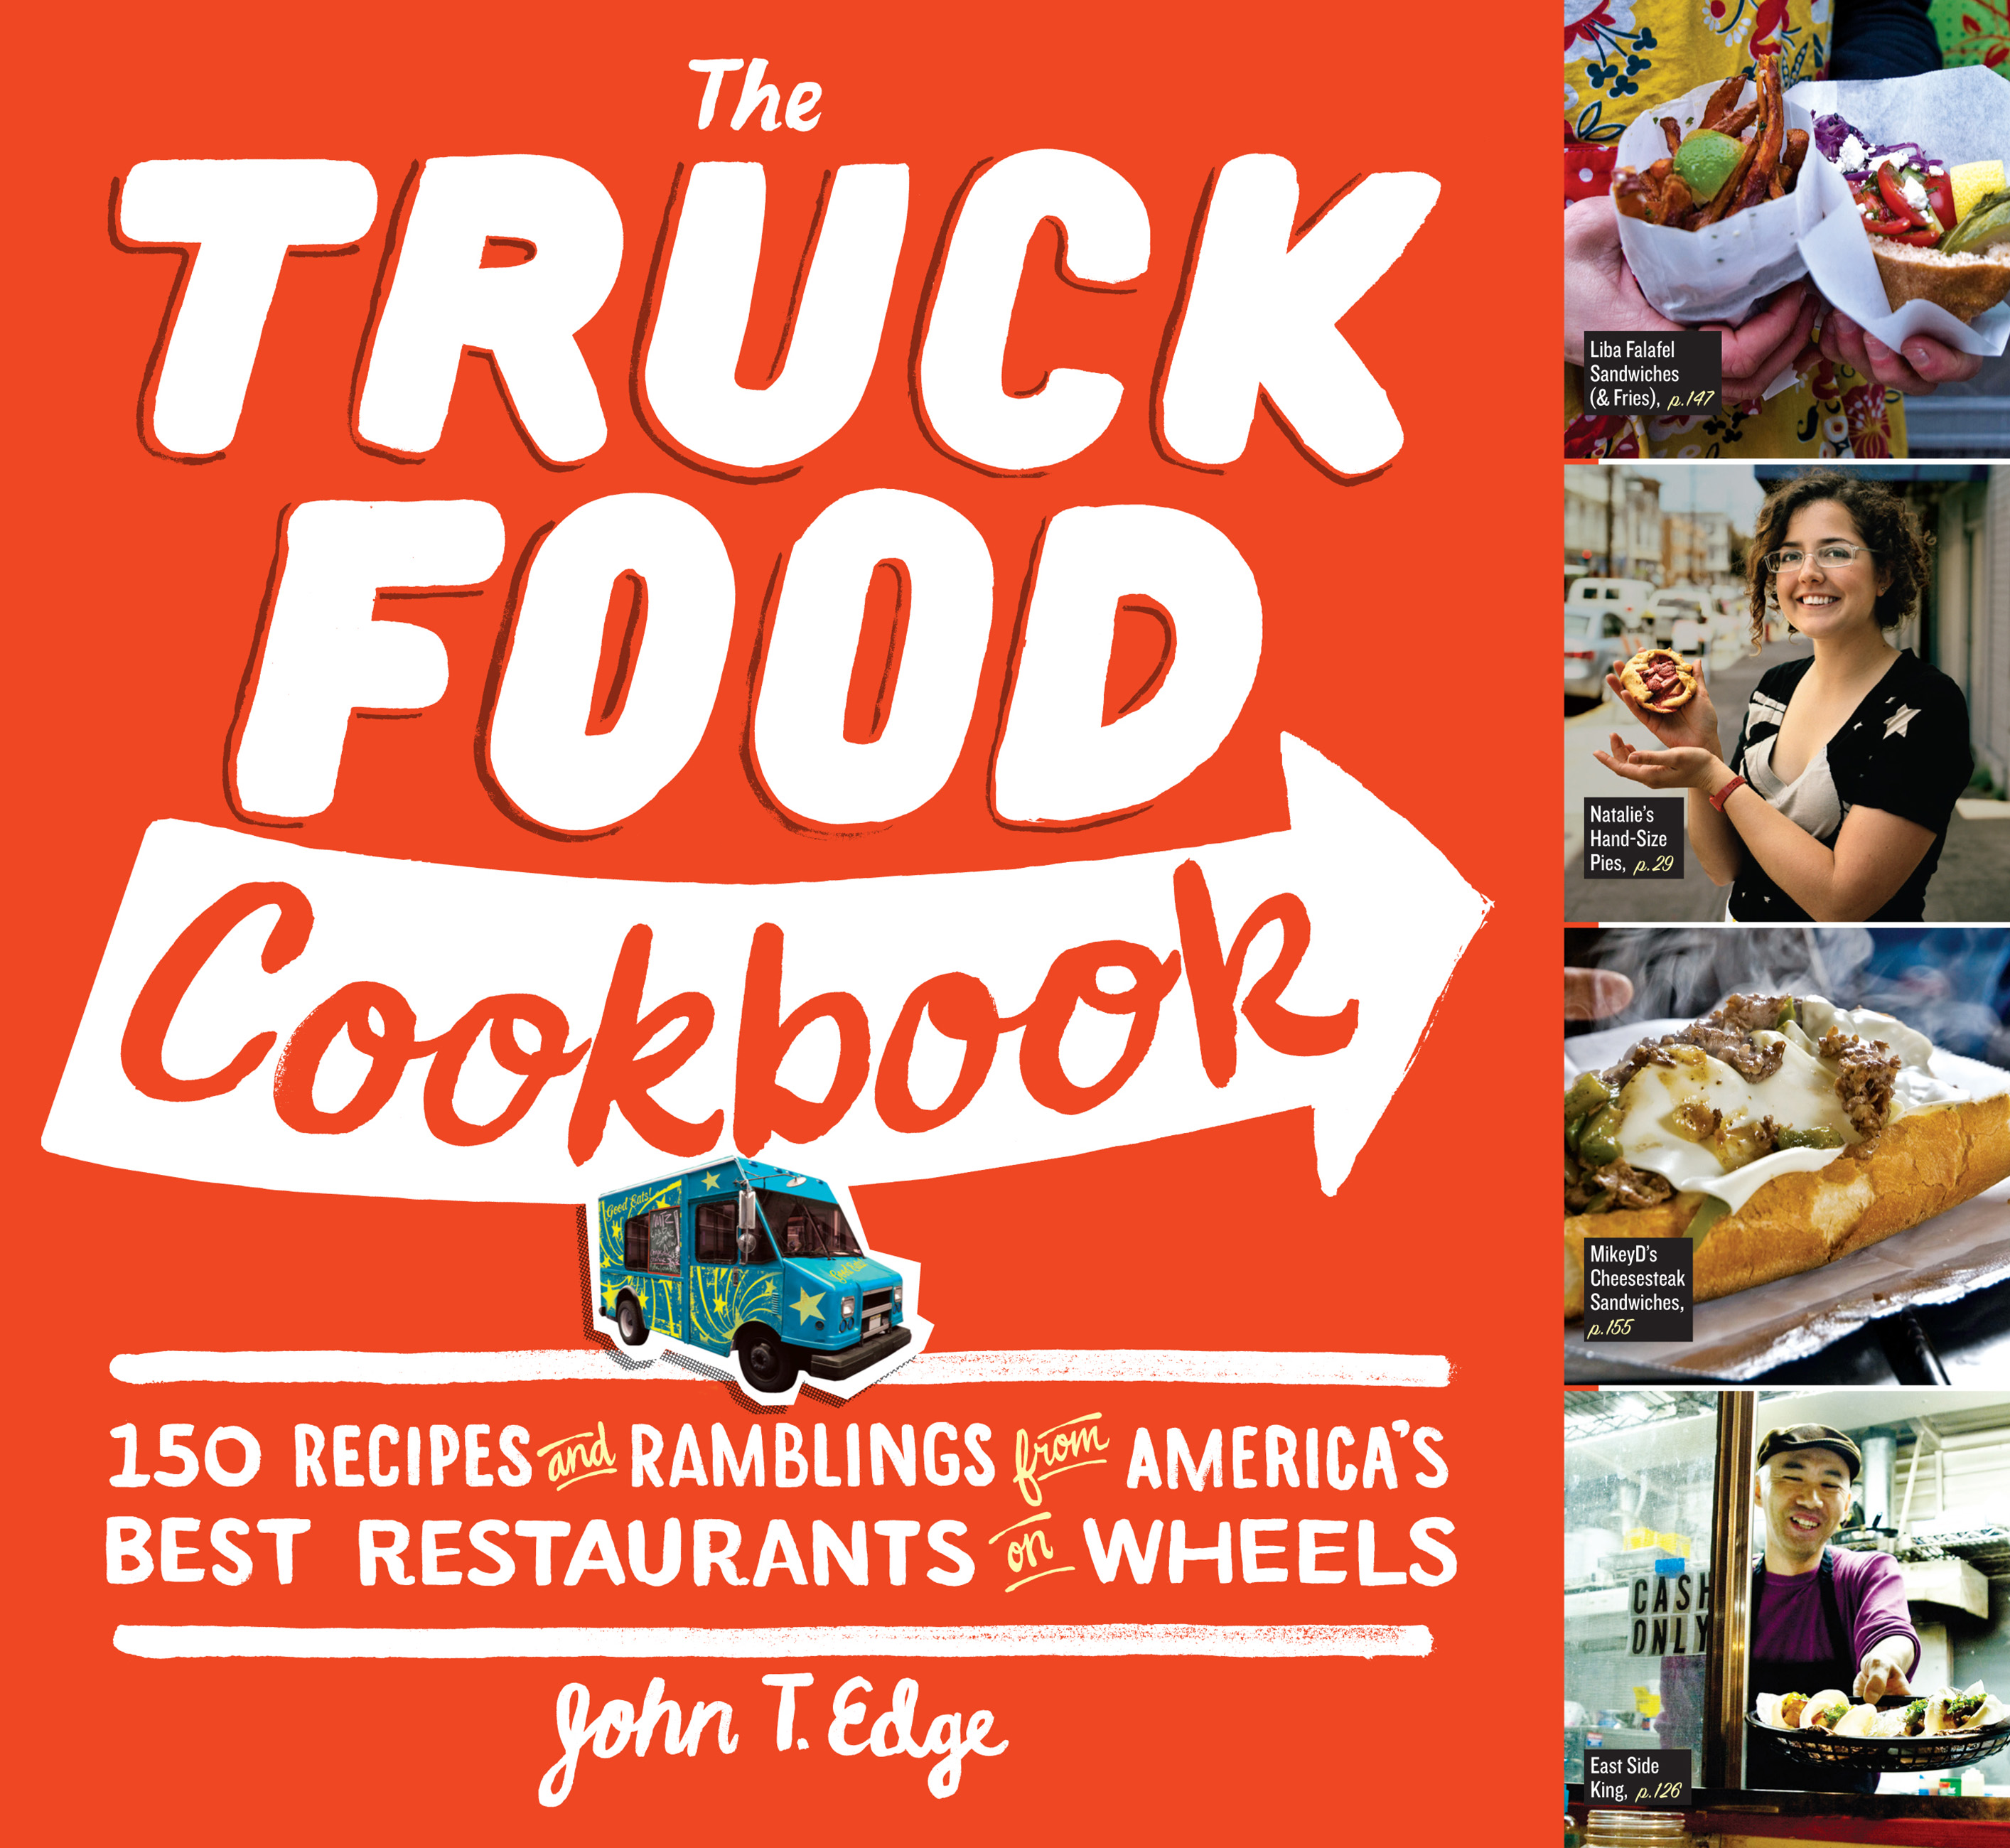 The truck food cookbook 150 recipes and ramblings from America's best restaurants on wheels cover image